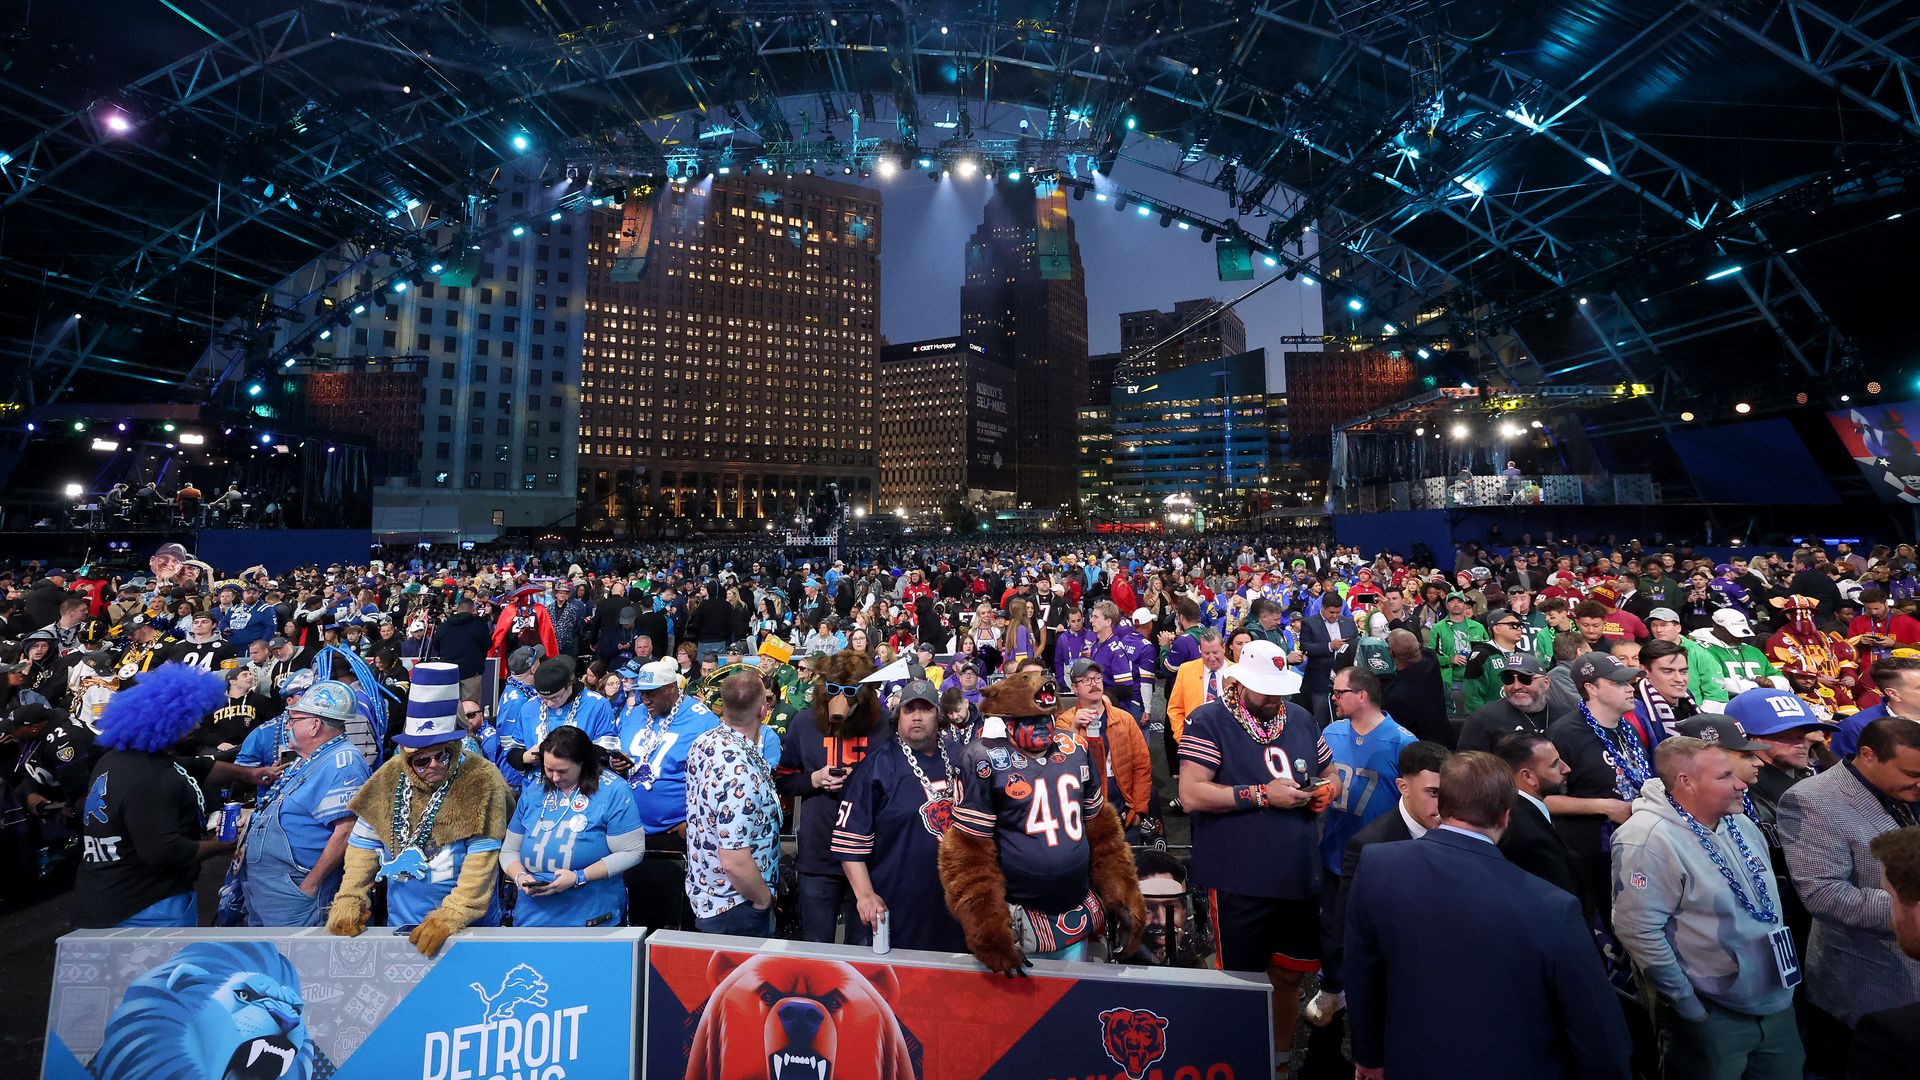 A packed crowd at the first round of the NFL Draft in downtown Detroit last week.